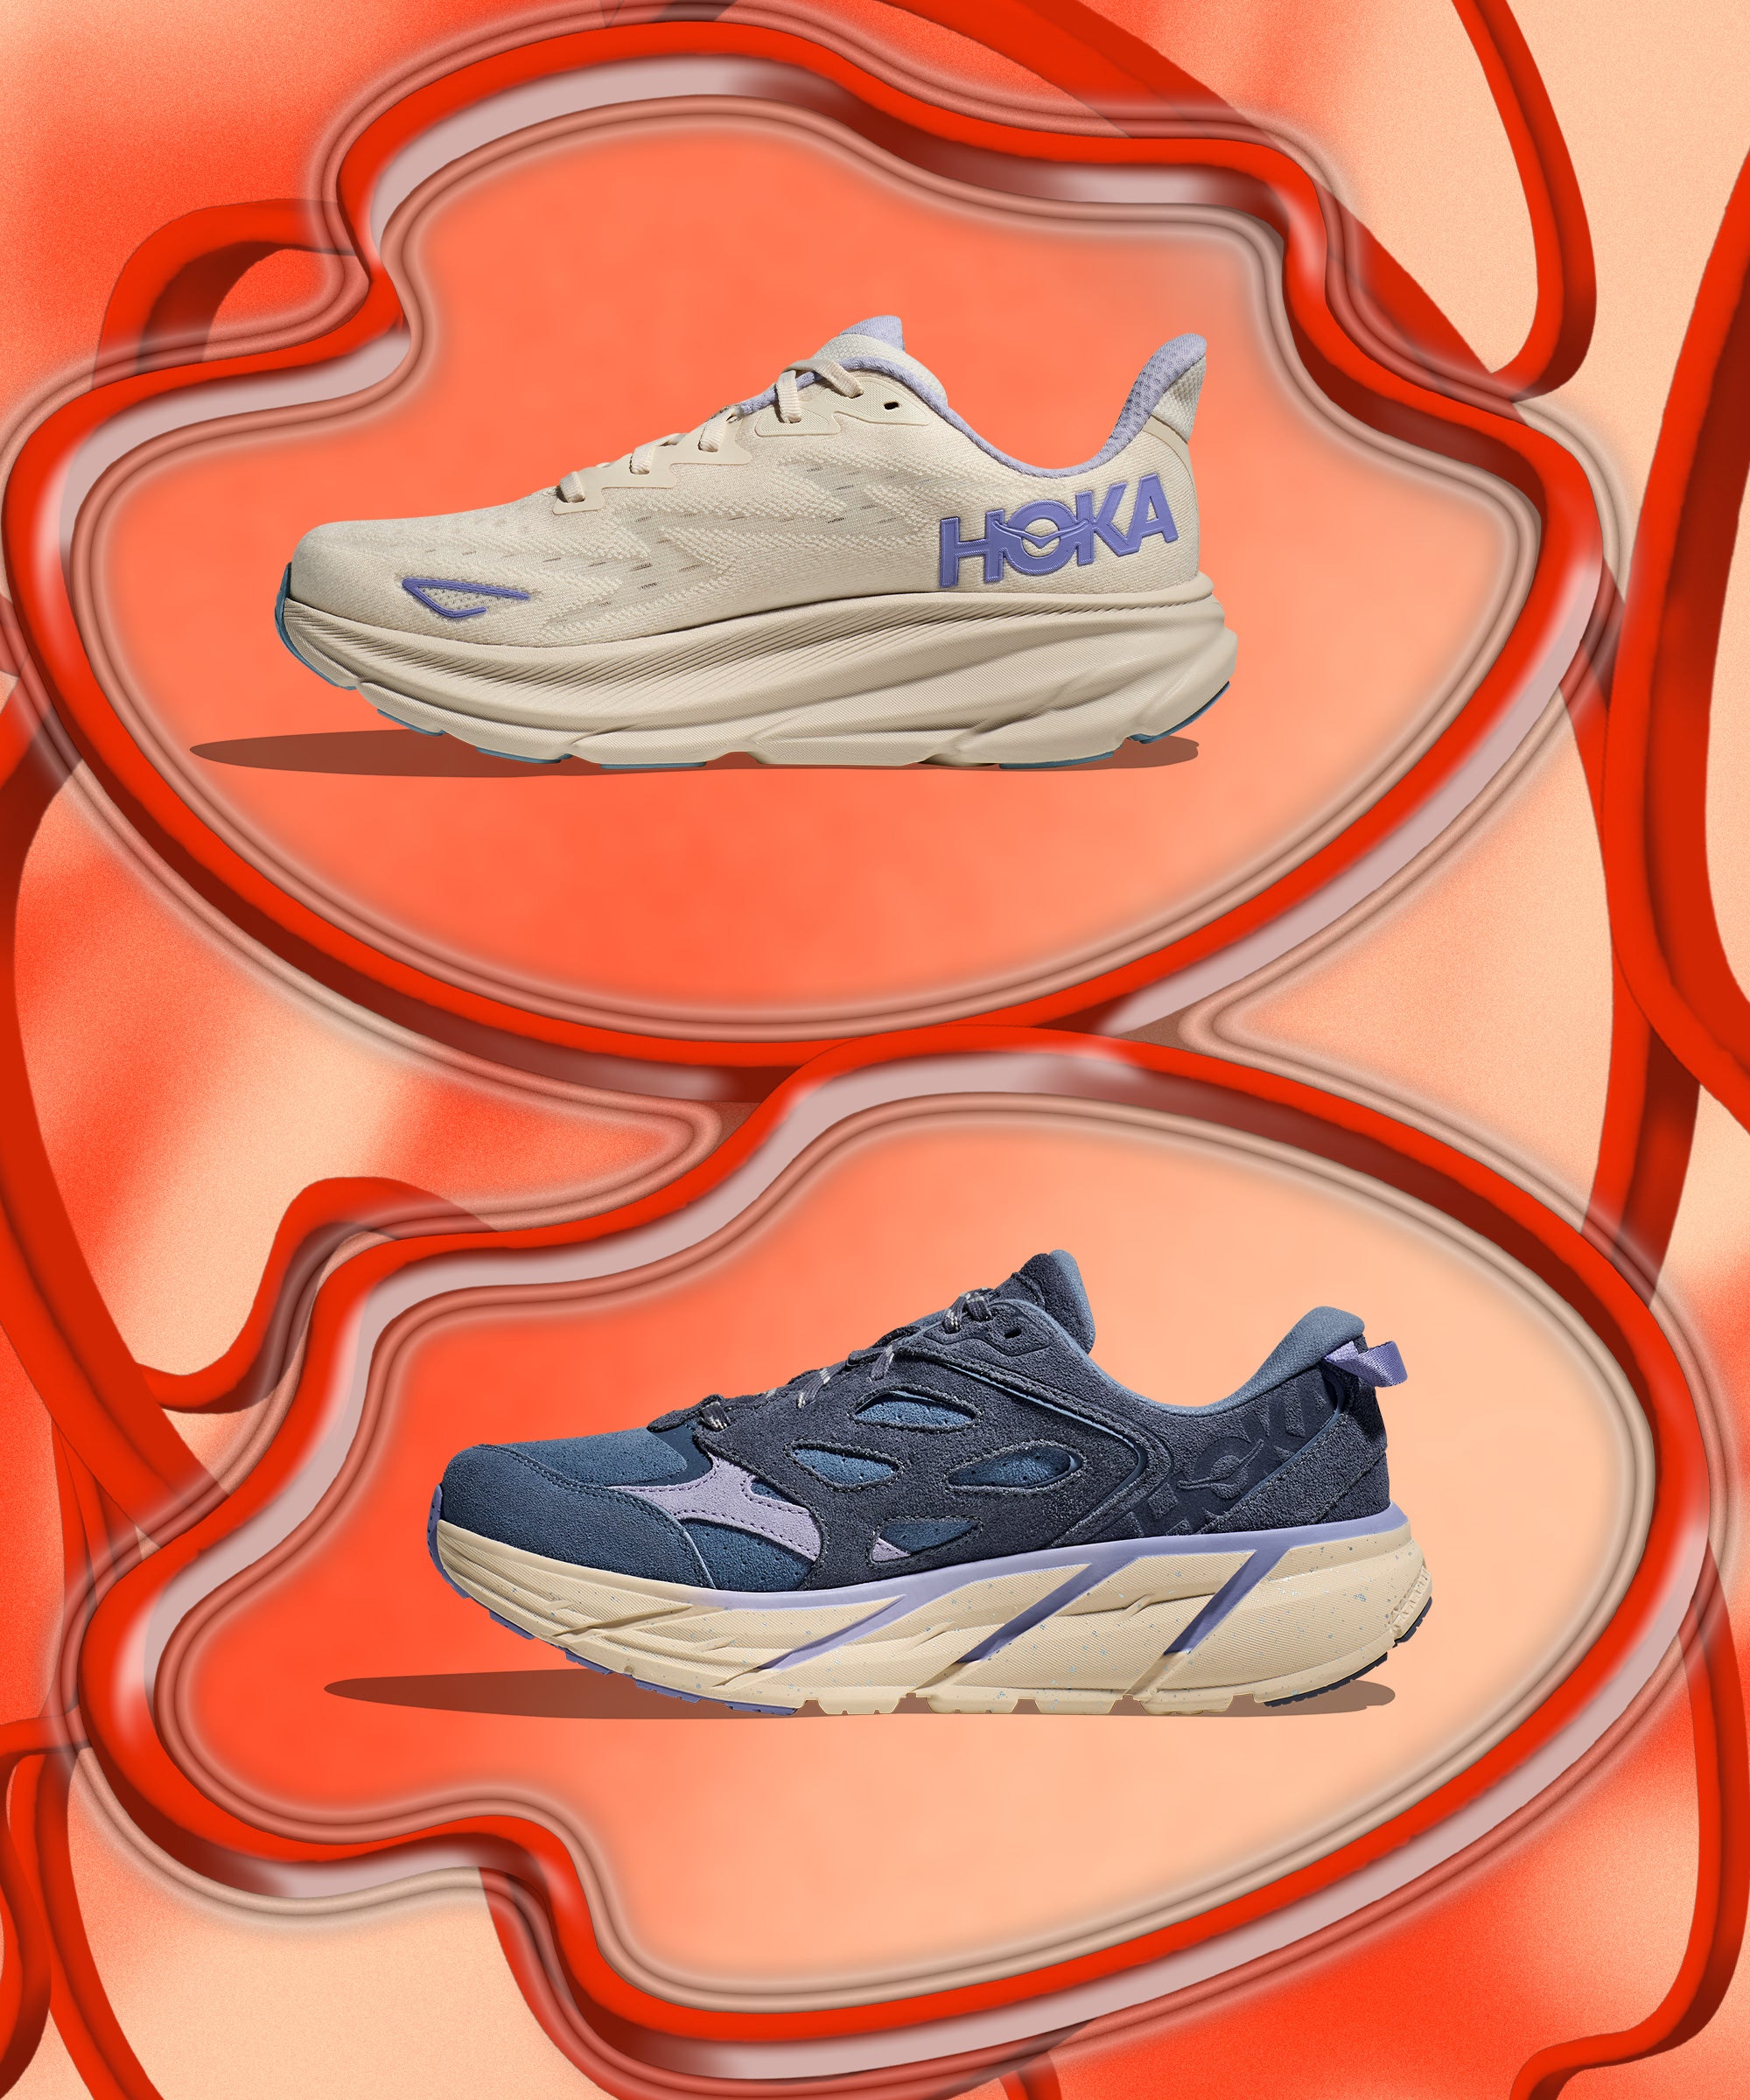 Hoka x FP Movement Collab Features Fashion-Forward Sneakers For Spring